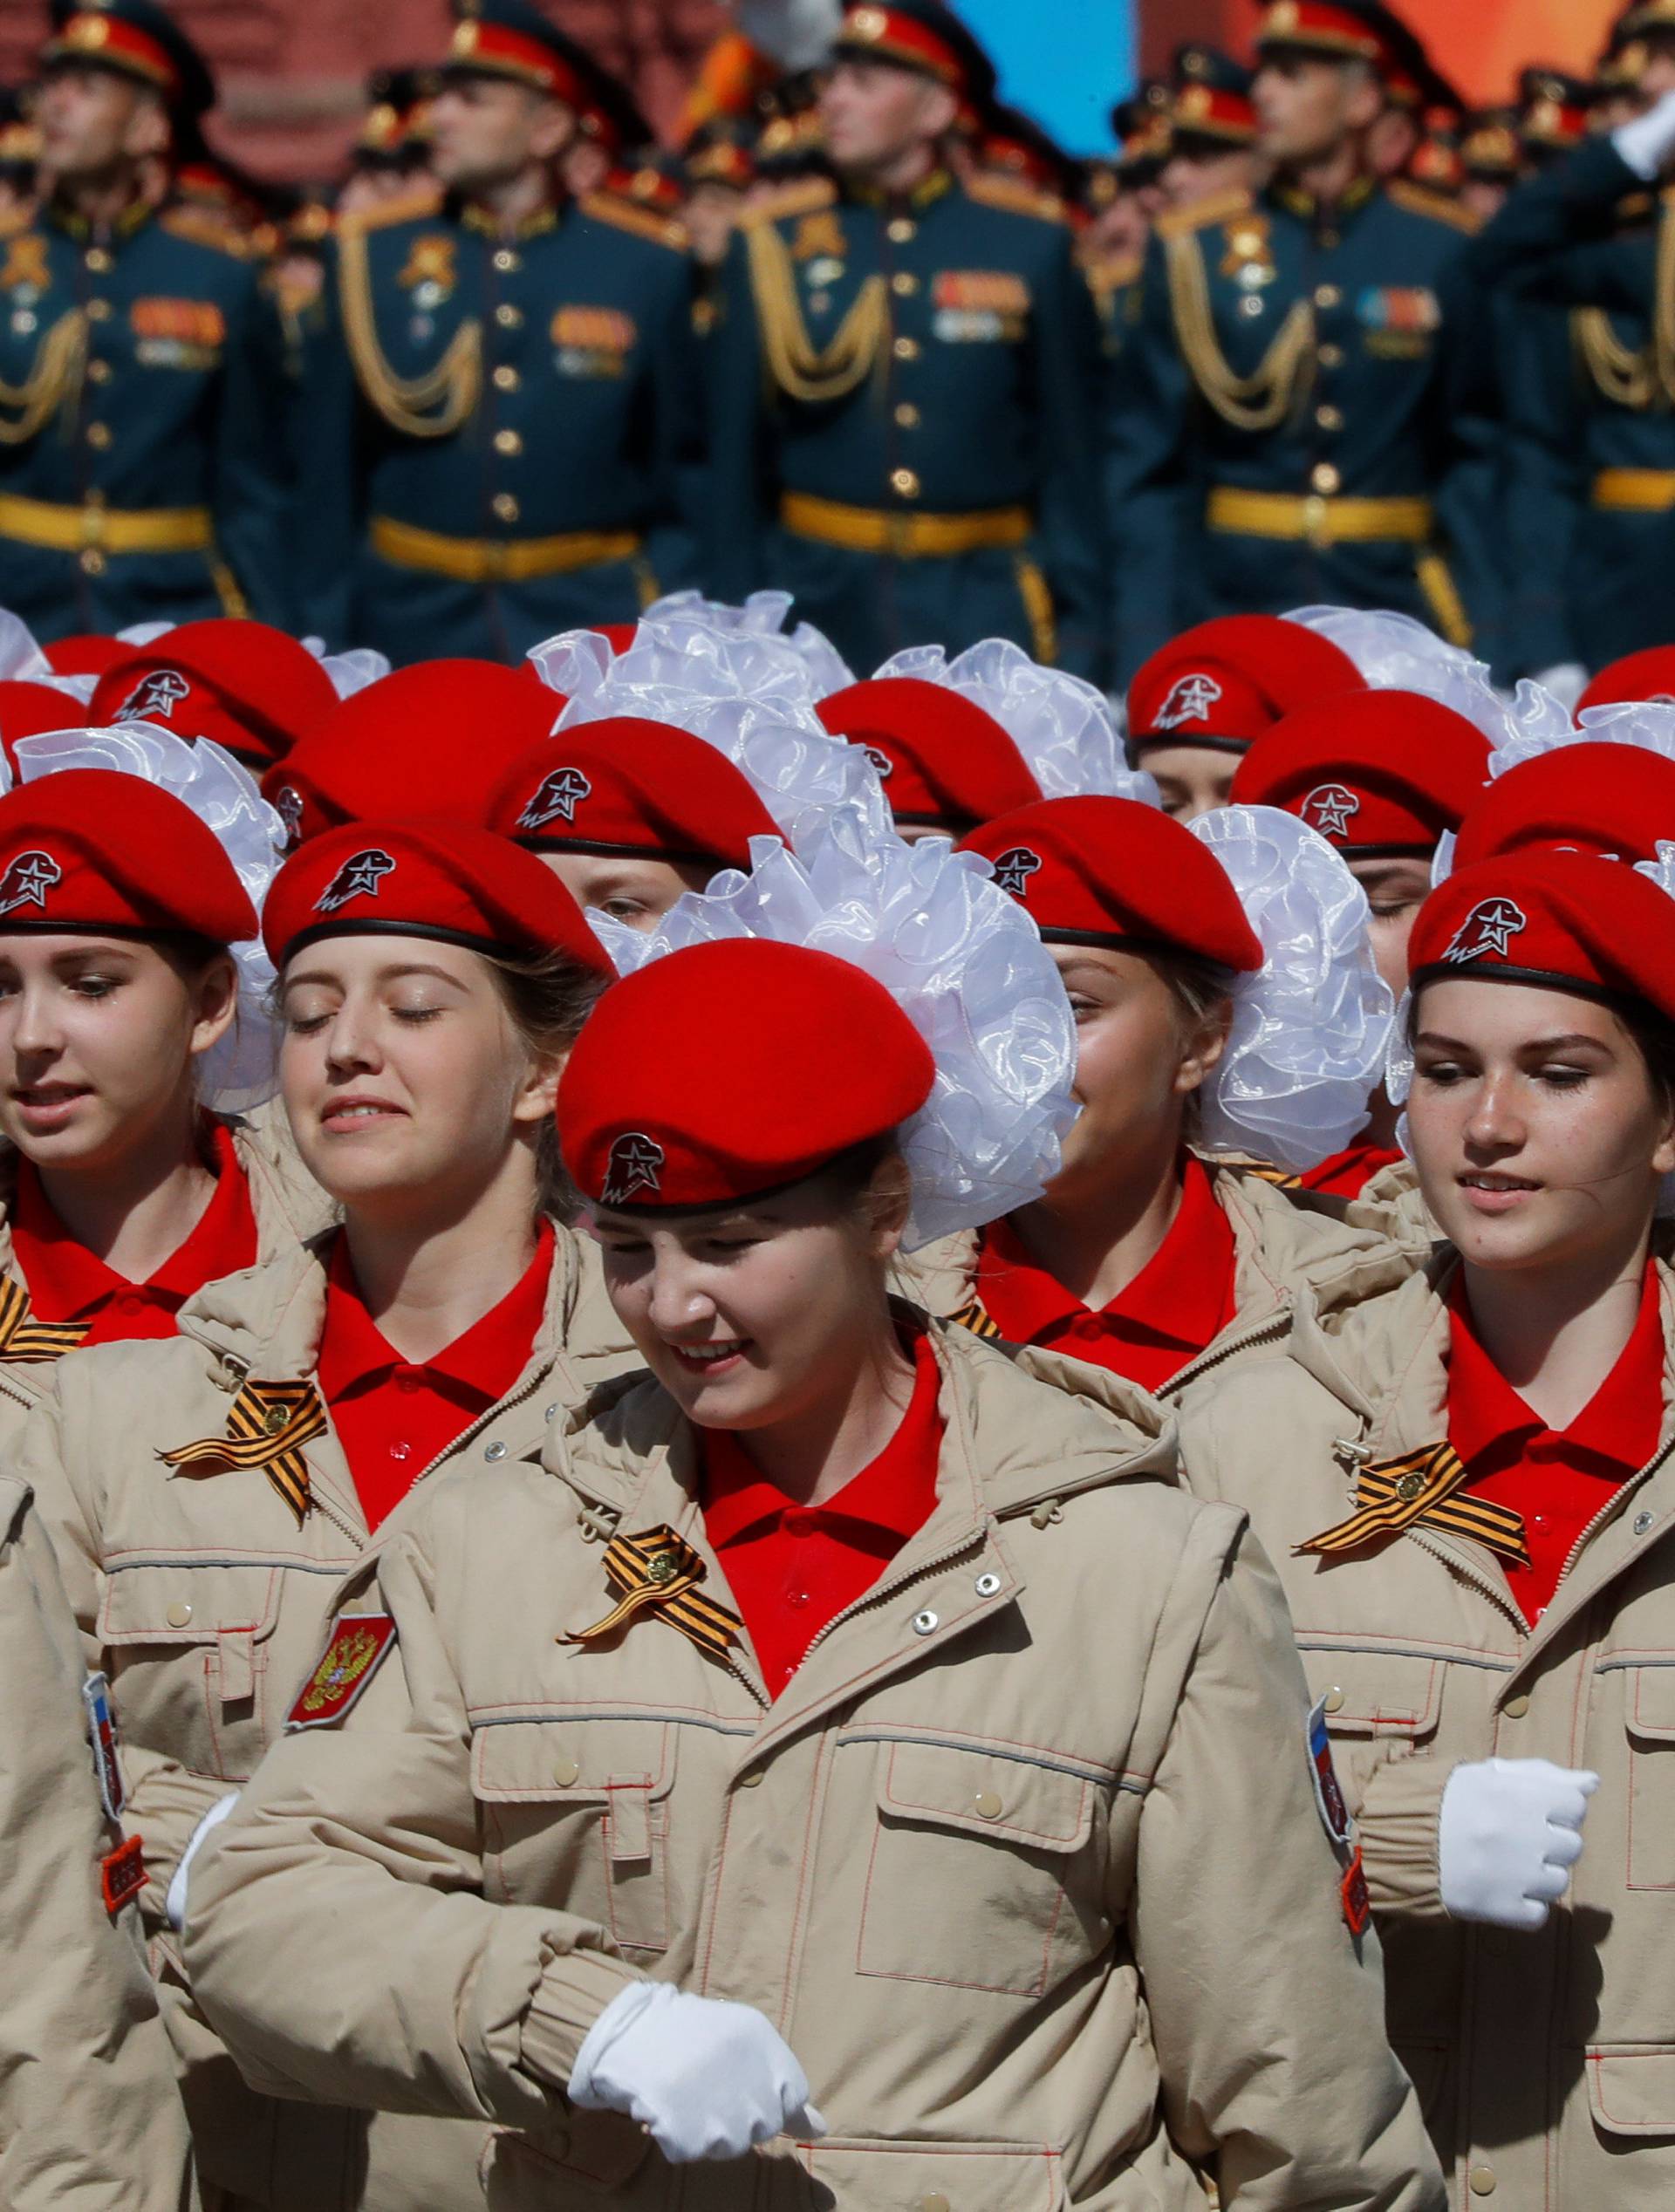 Members of Yunarmiya youth military organisation march during the Victory Day parade at Red Square in Moscow